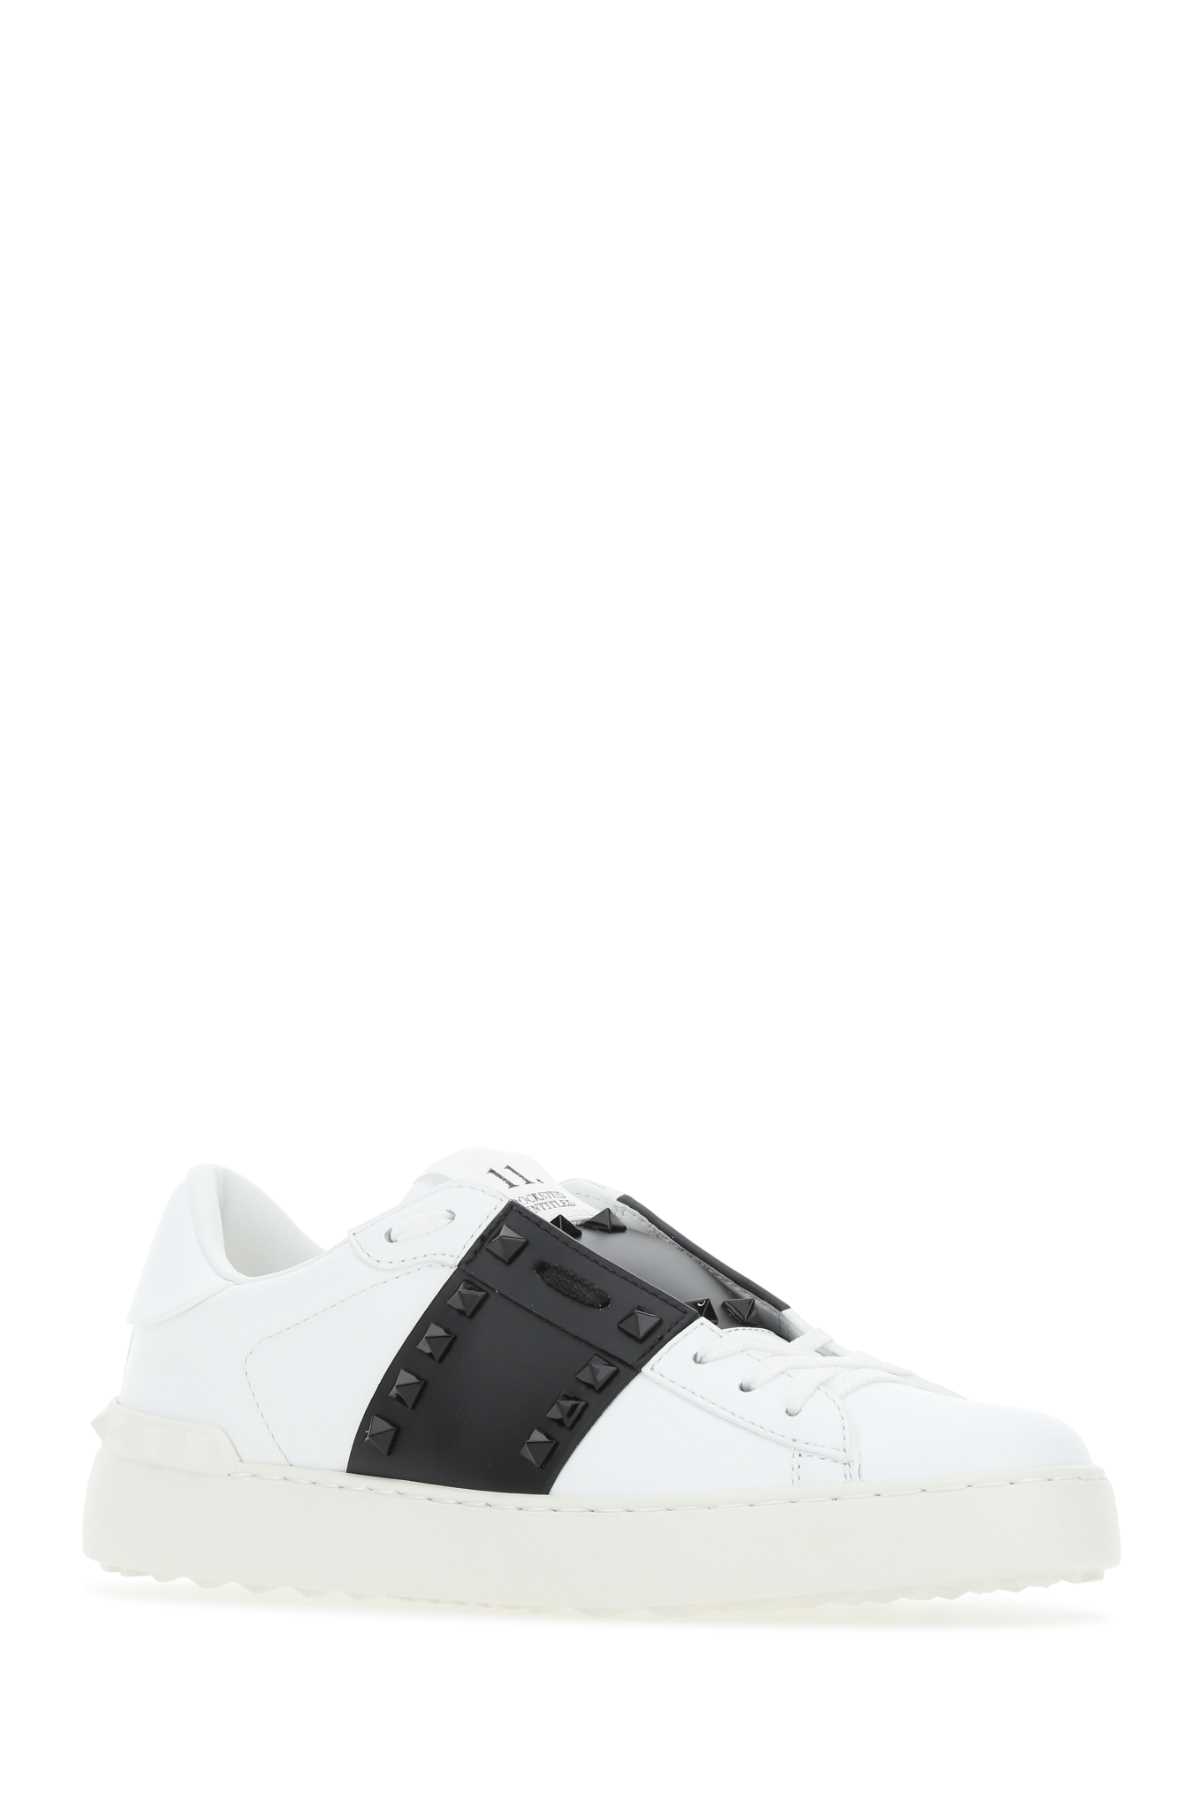 VALENTINO GARAVANI WHITE LEATHER ROCKSTUD UNTITLED SNEAKERS WITH BLACK BAND